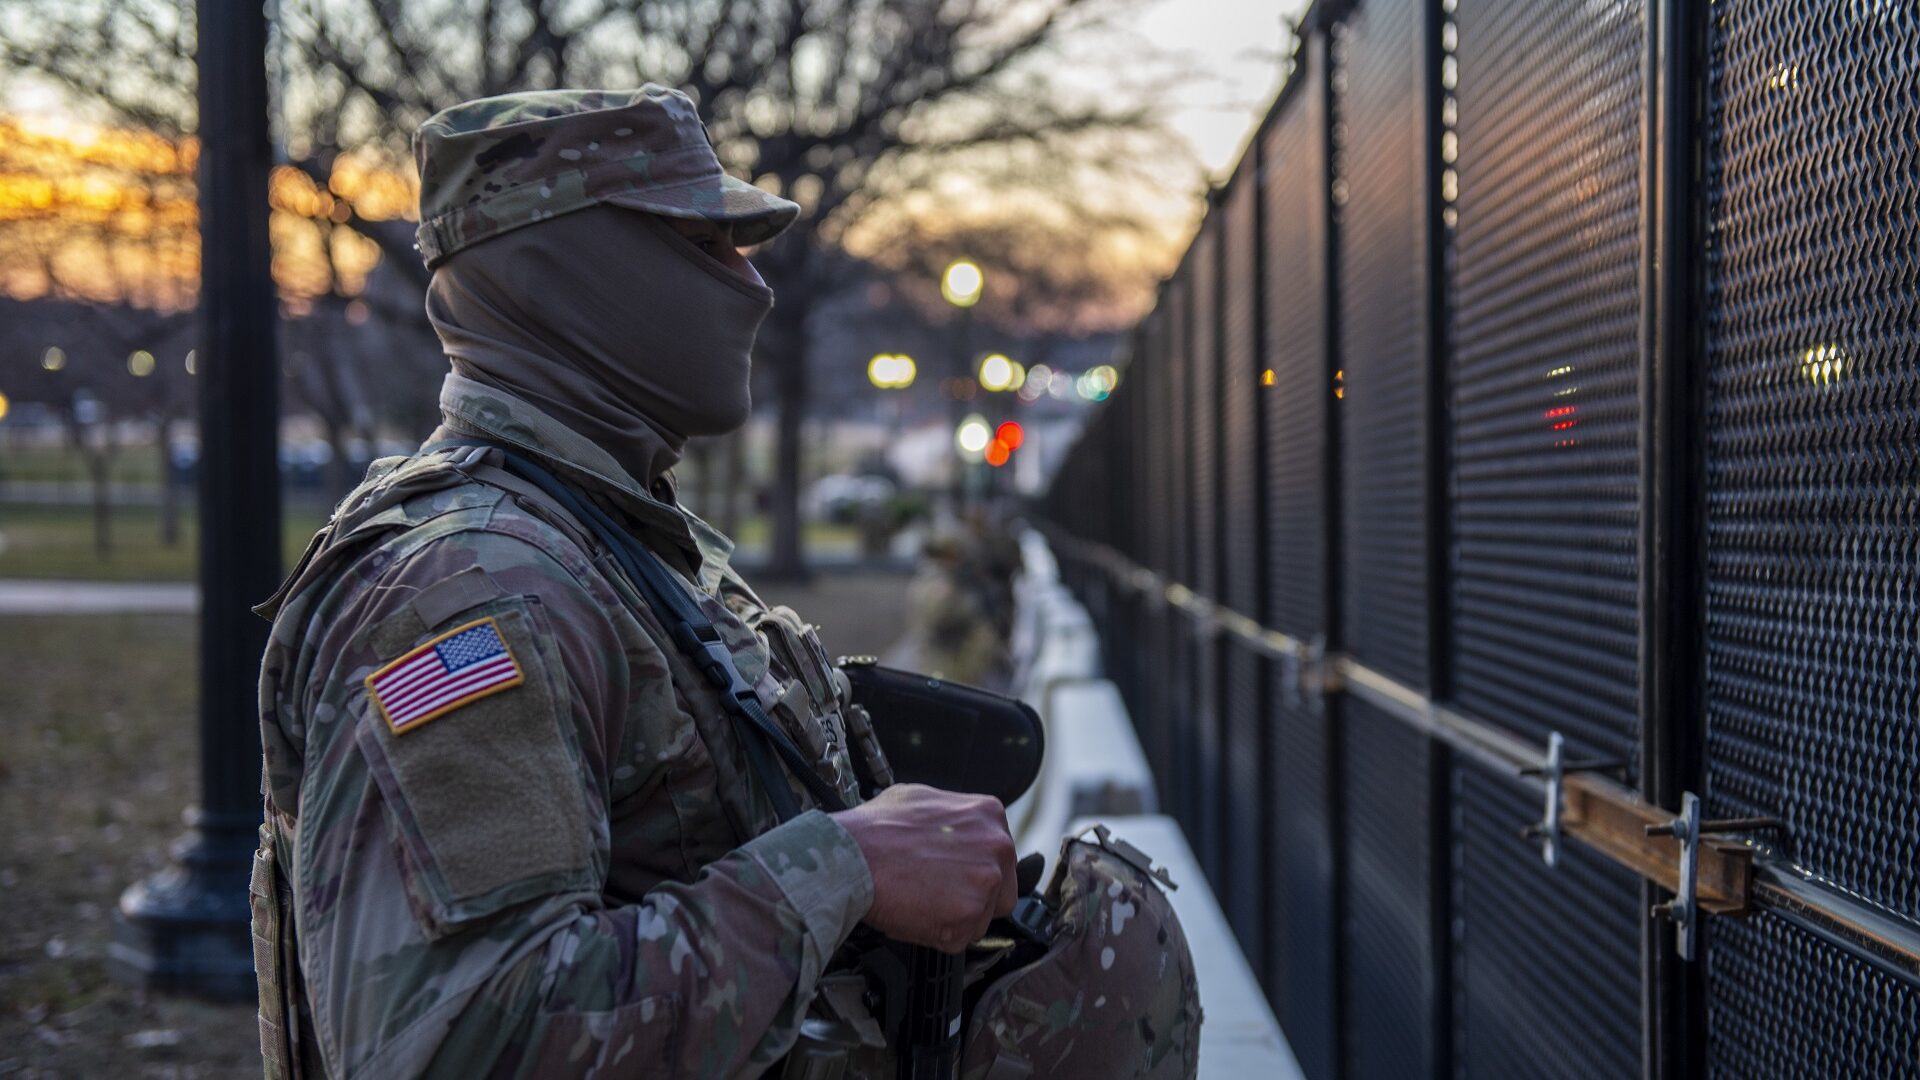 An Oklahoma National Guard soldier stands watch along a perimeter fence near the U.S. Capitol building in Washington, D.C., Jan. 20, 2021.